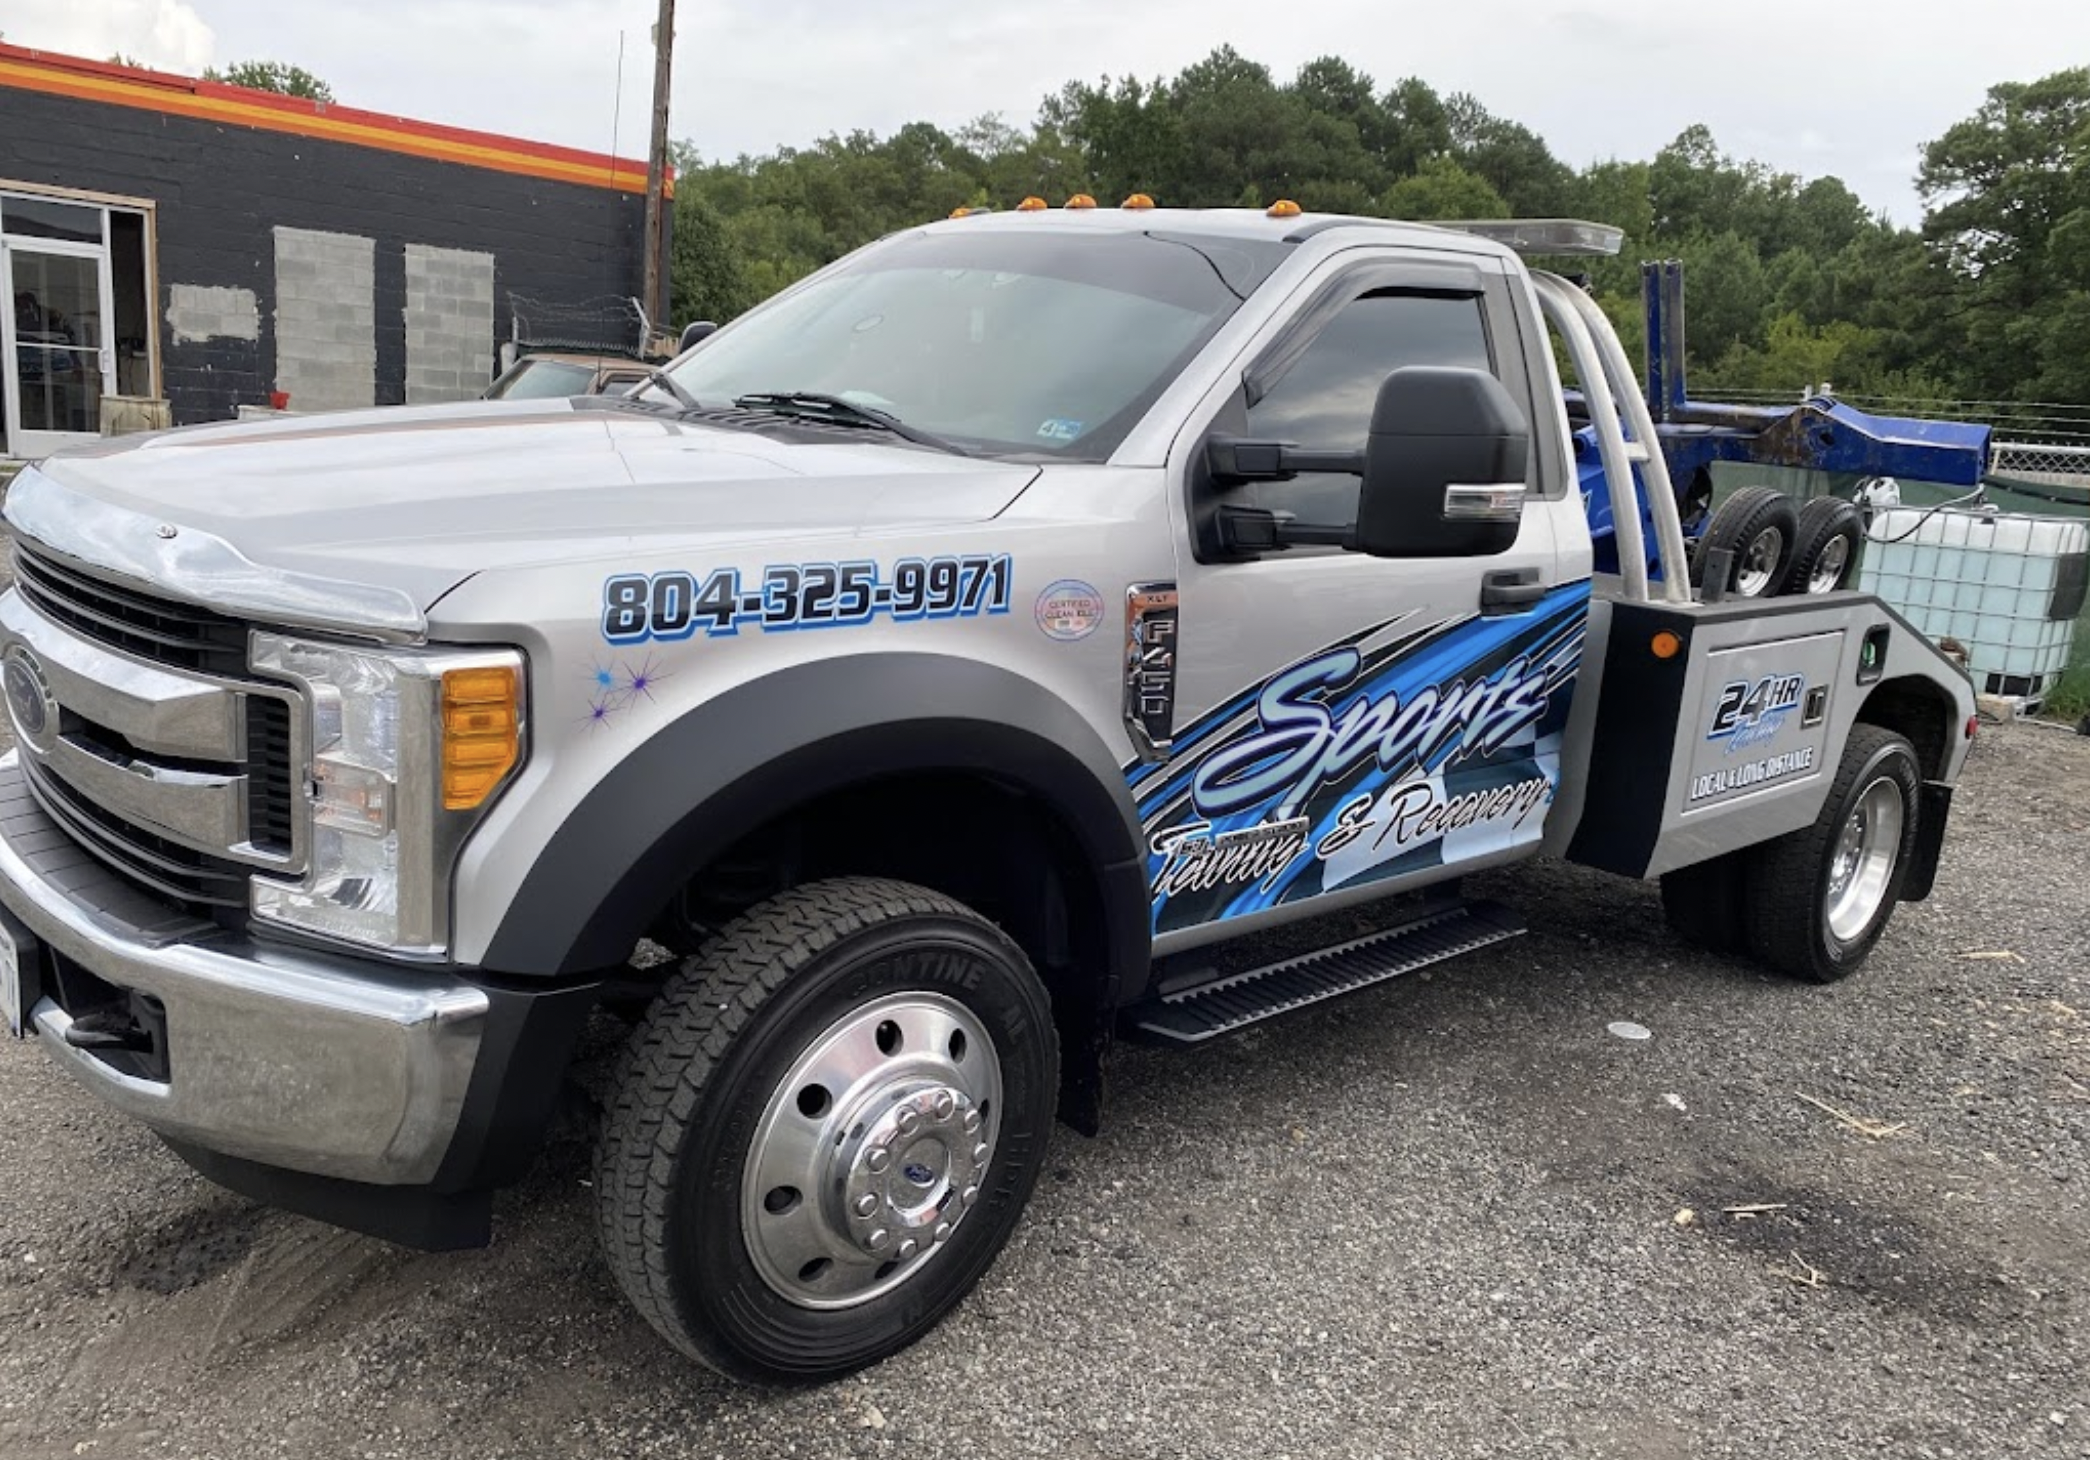 Sports Towing and Recovery Roadside Assistance